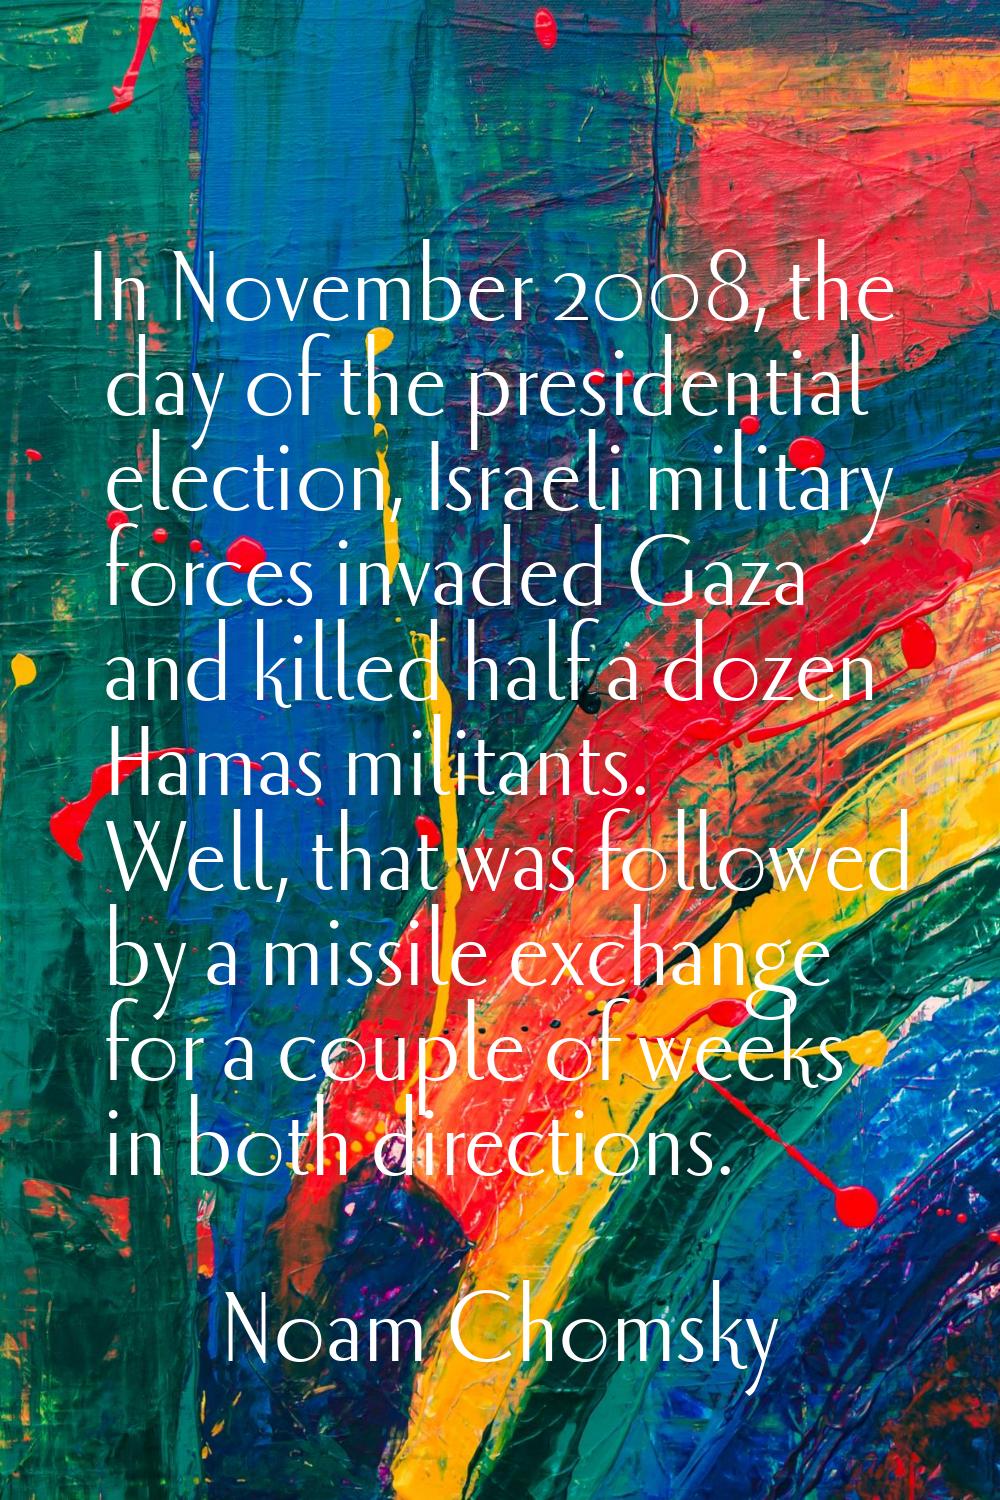 In November 2008, the day of the presidential election, Israeli military forces invaded Gaza and ki